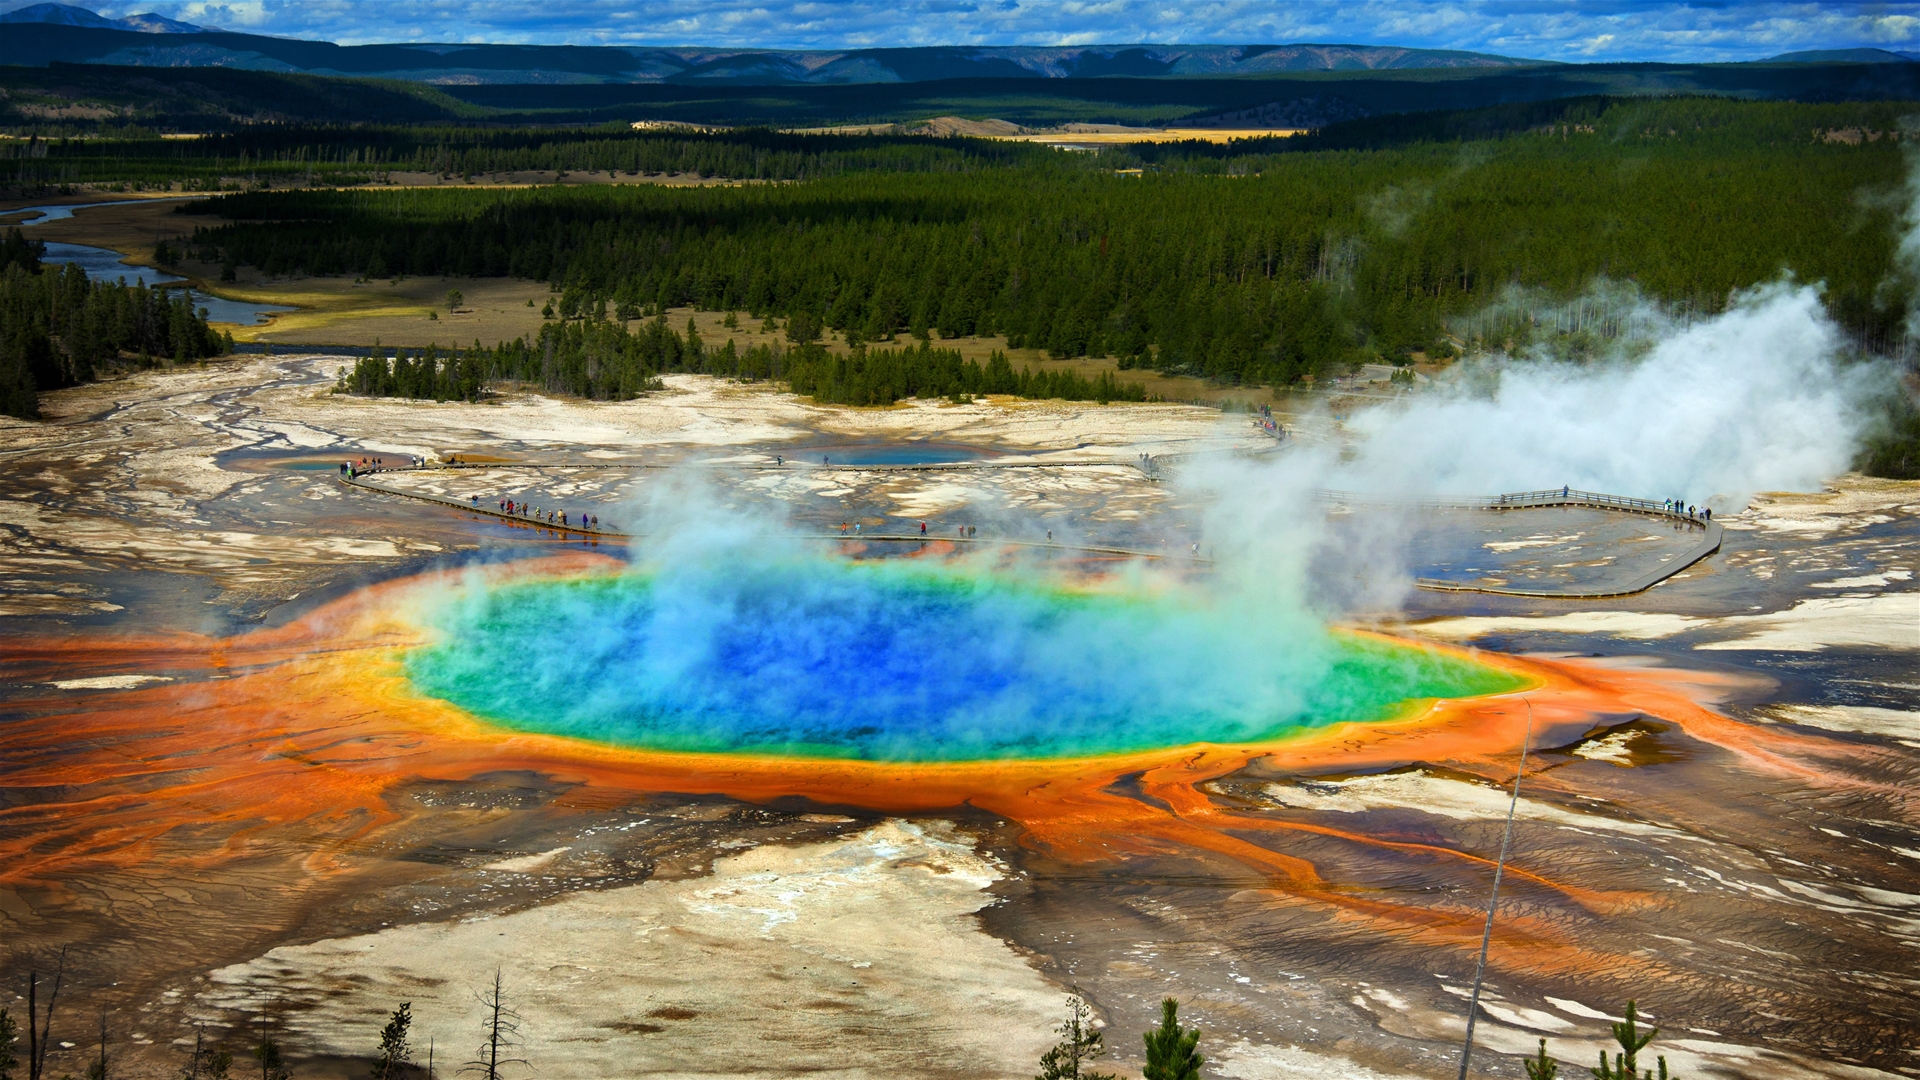 Yellowstone National Park Information